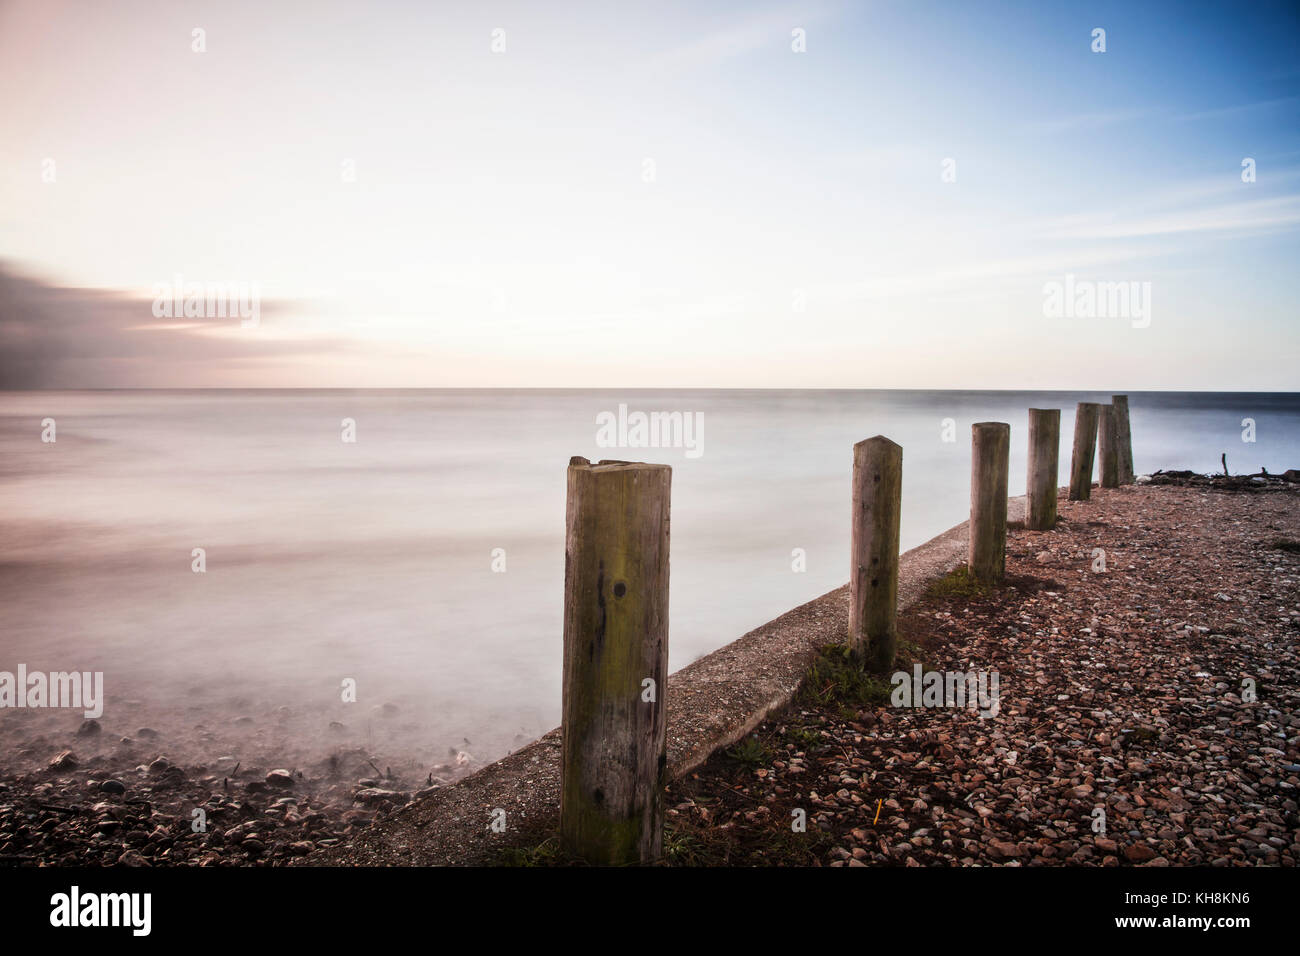 A simple image of groynes on the beach at Charmouth in Dorset. Stock Photo